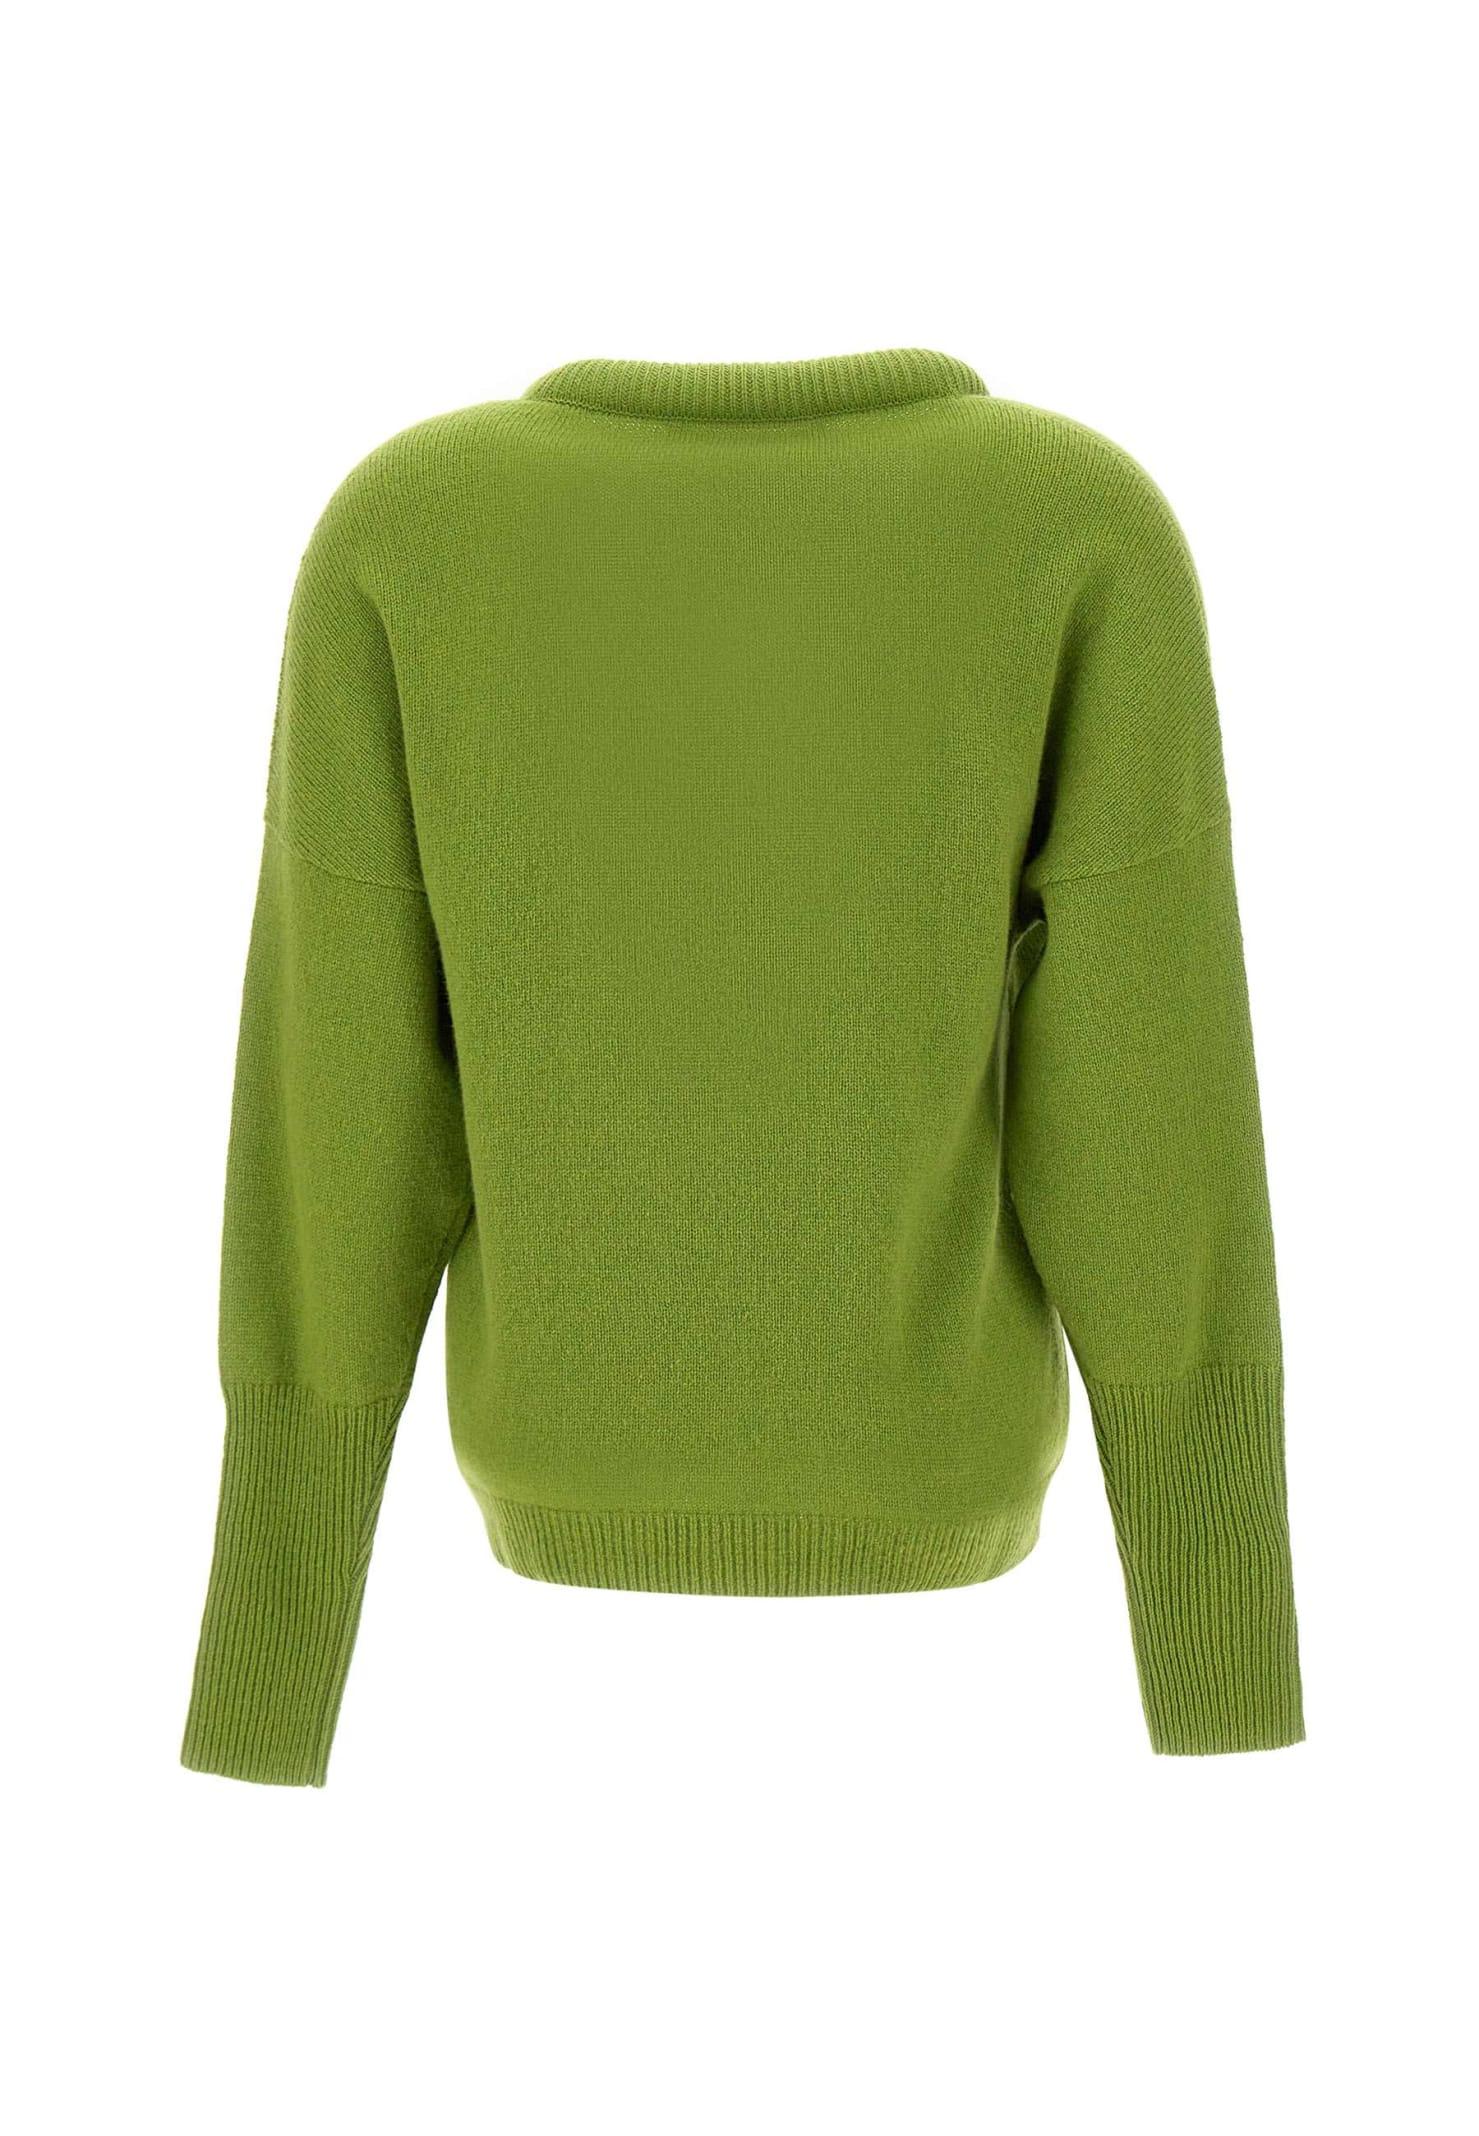 FEDERICA TOSI Wool And Cashmere Sweater in Green | Lyst